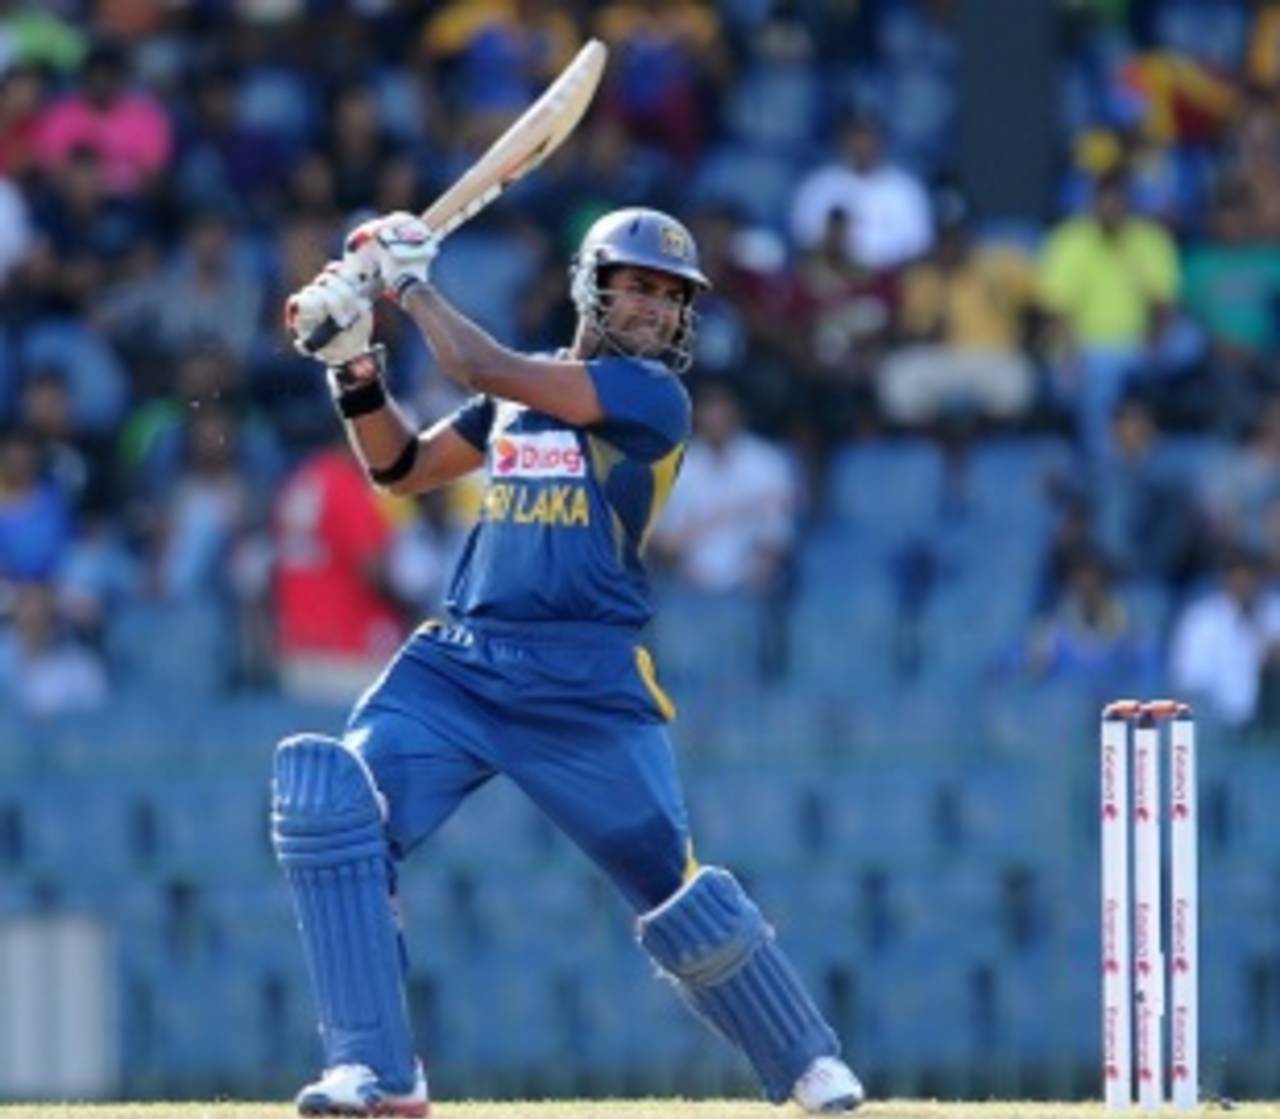 Lahiru Thirimanne's innings in the fifth ODI, full of composure and calculation, offered a glimpse of his talent as a potential No. 3 for Sri Lanka&nbsp;&nbsp;&bull;&nbsp;&nbsp;AFP